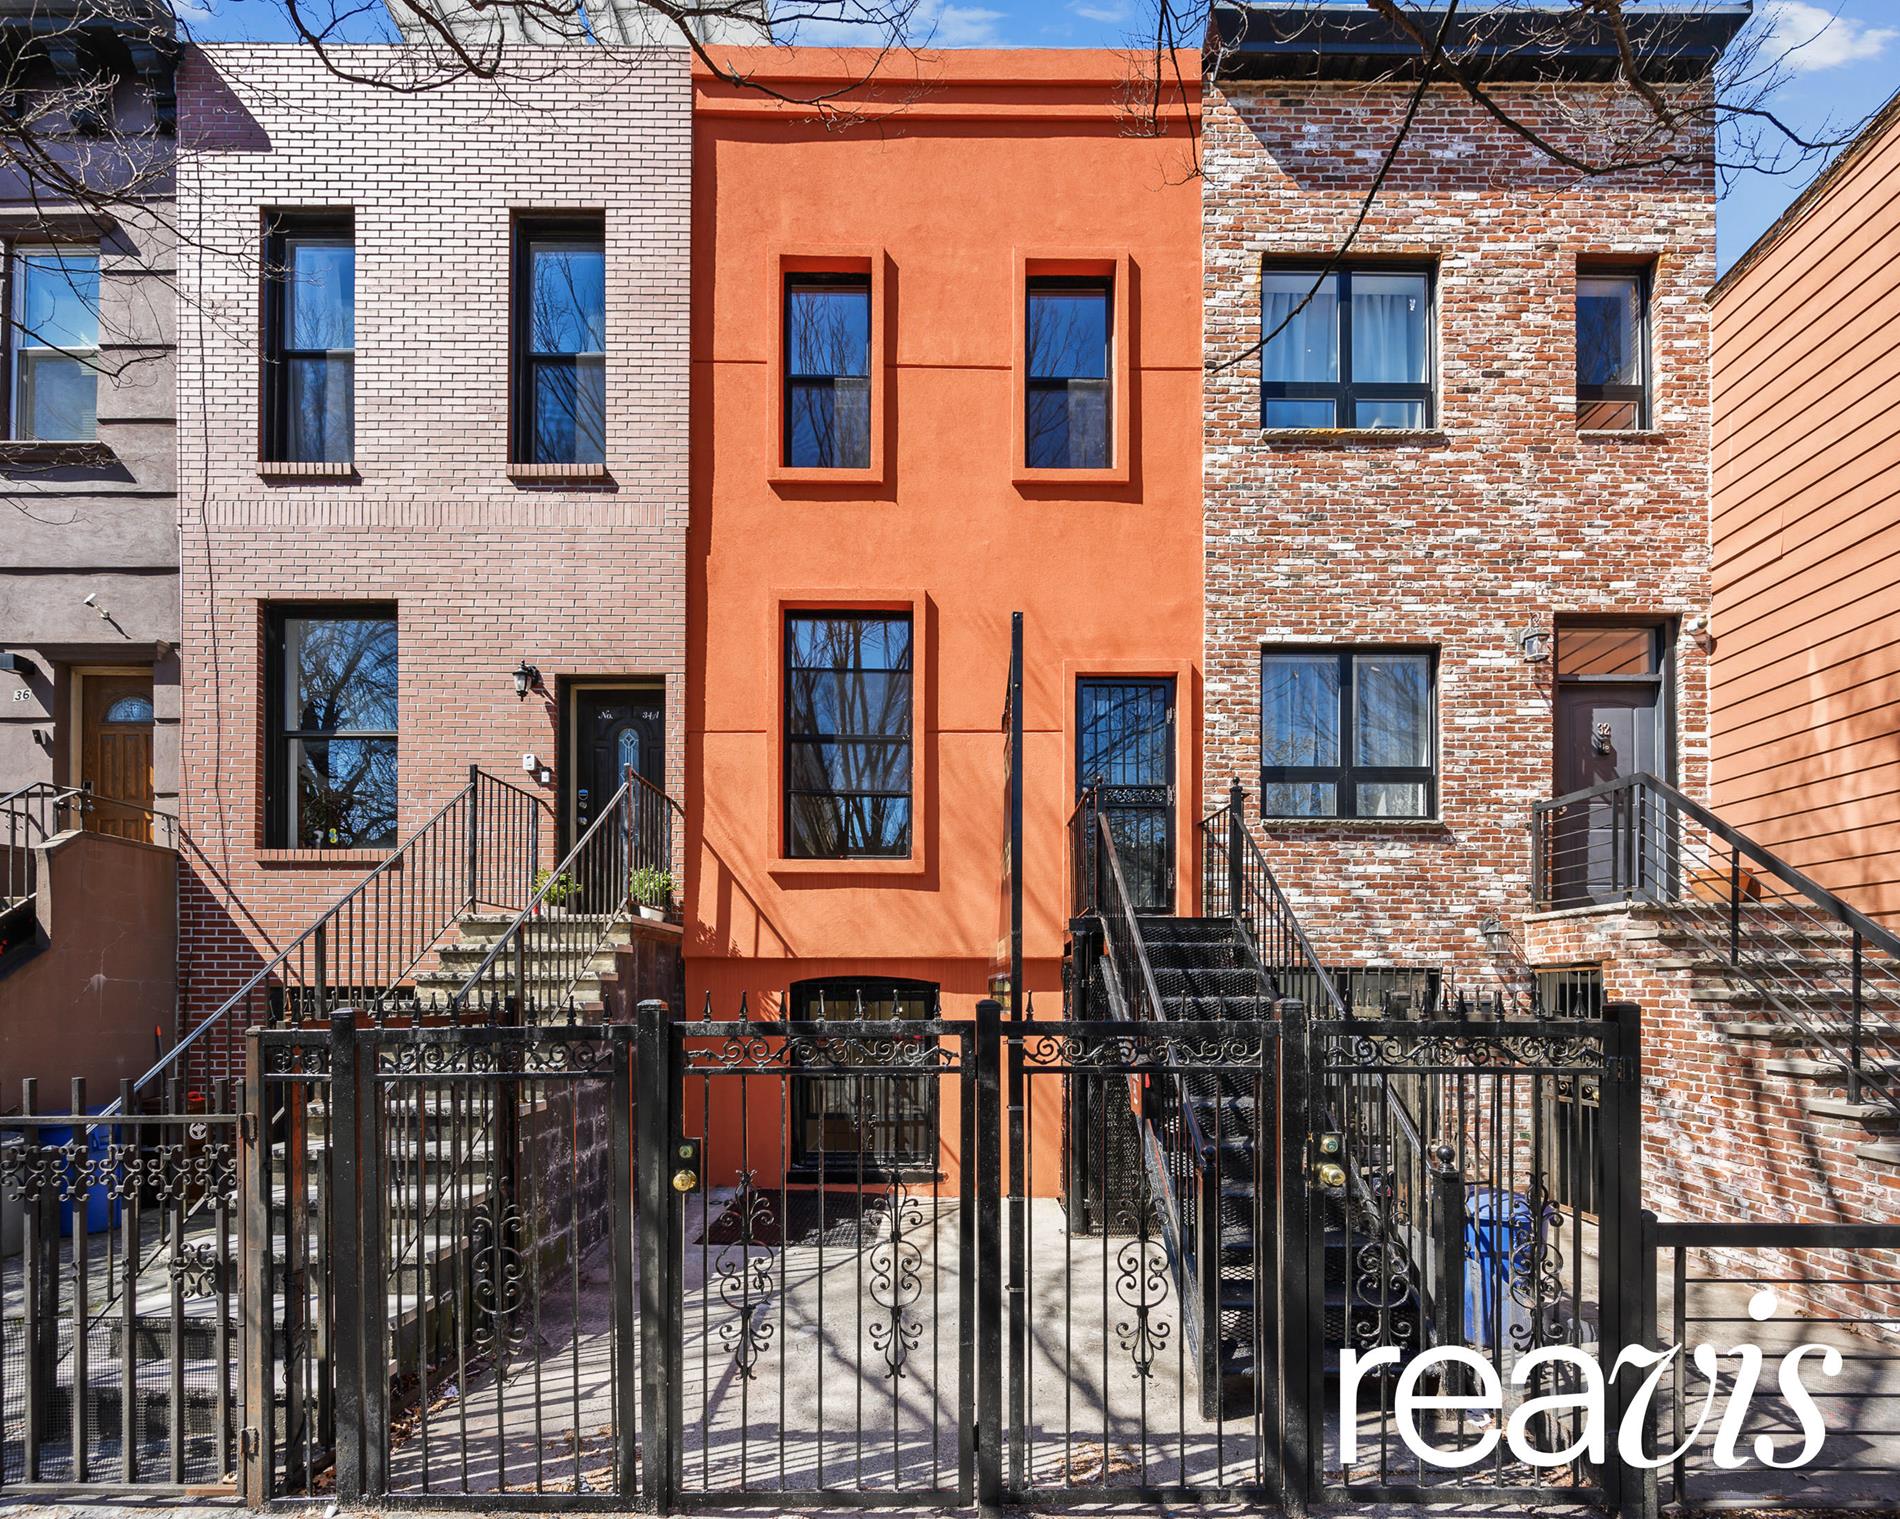 34 Rochester Avenue, Stuyvesant Heights, Downtown, NYC - 4 Bedrooms  
3 Bathrooms  
9 Rooms - 